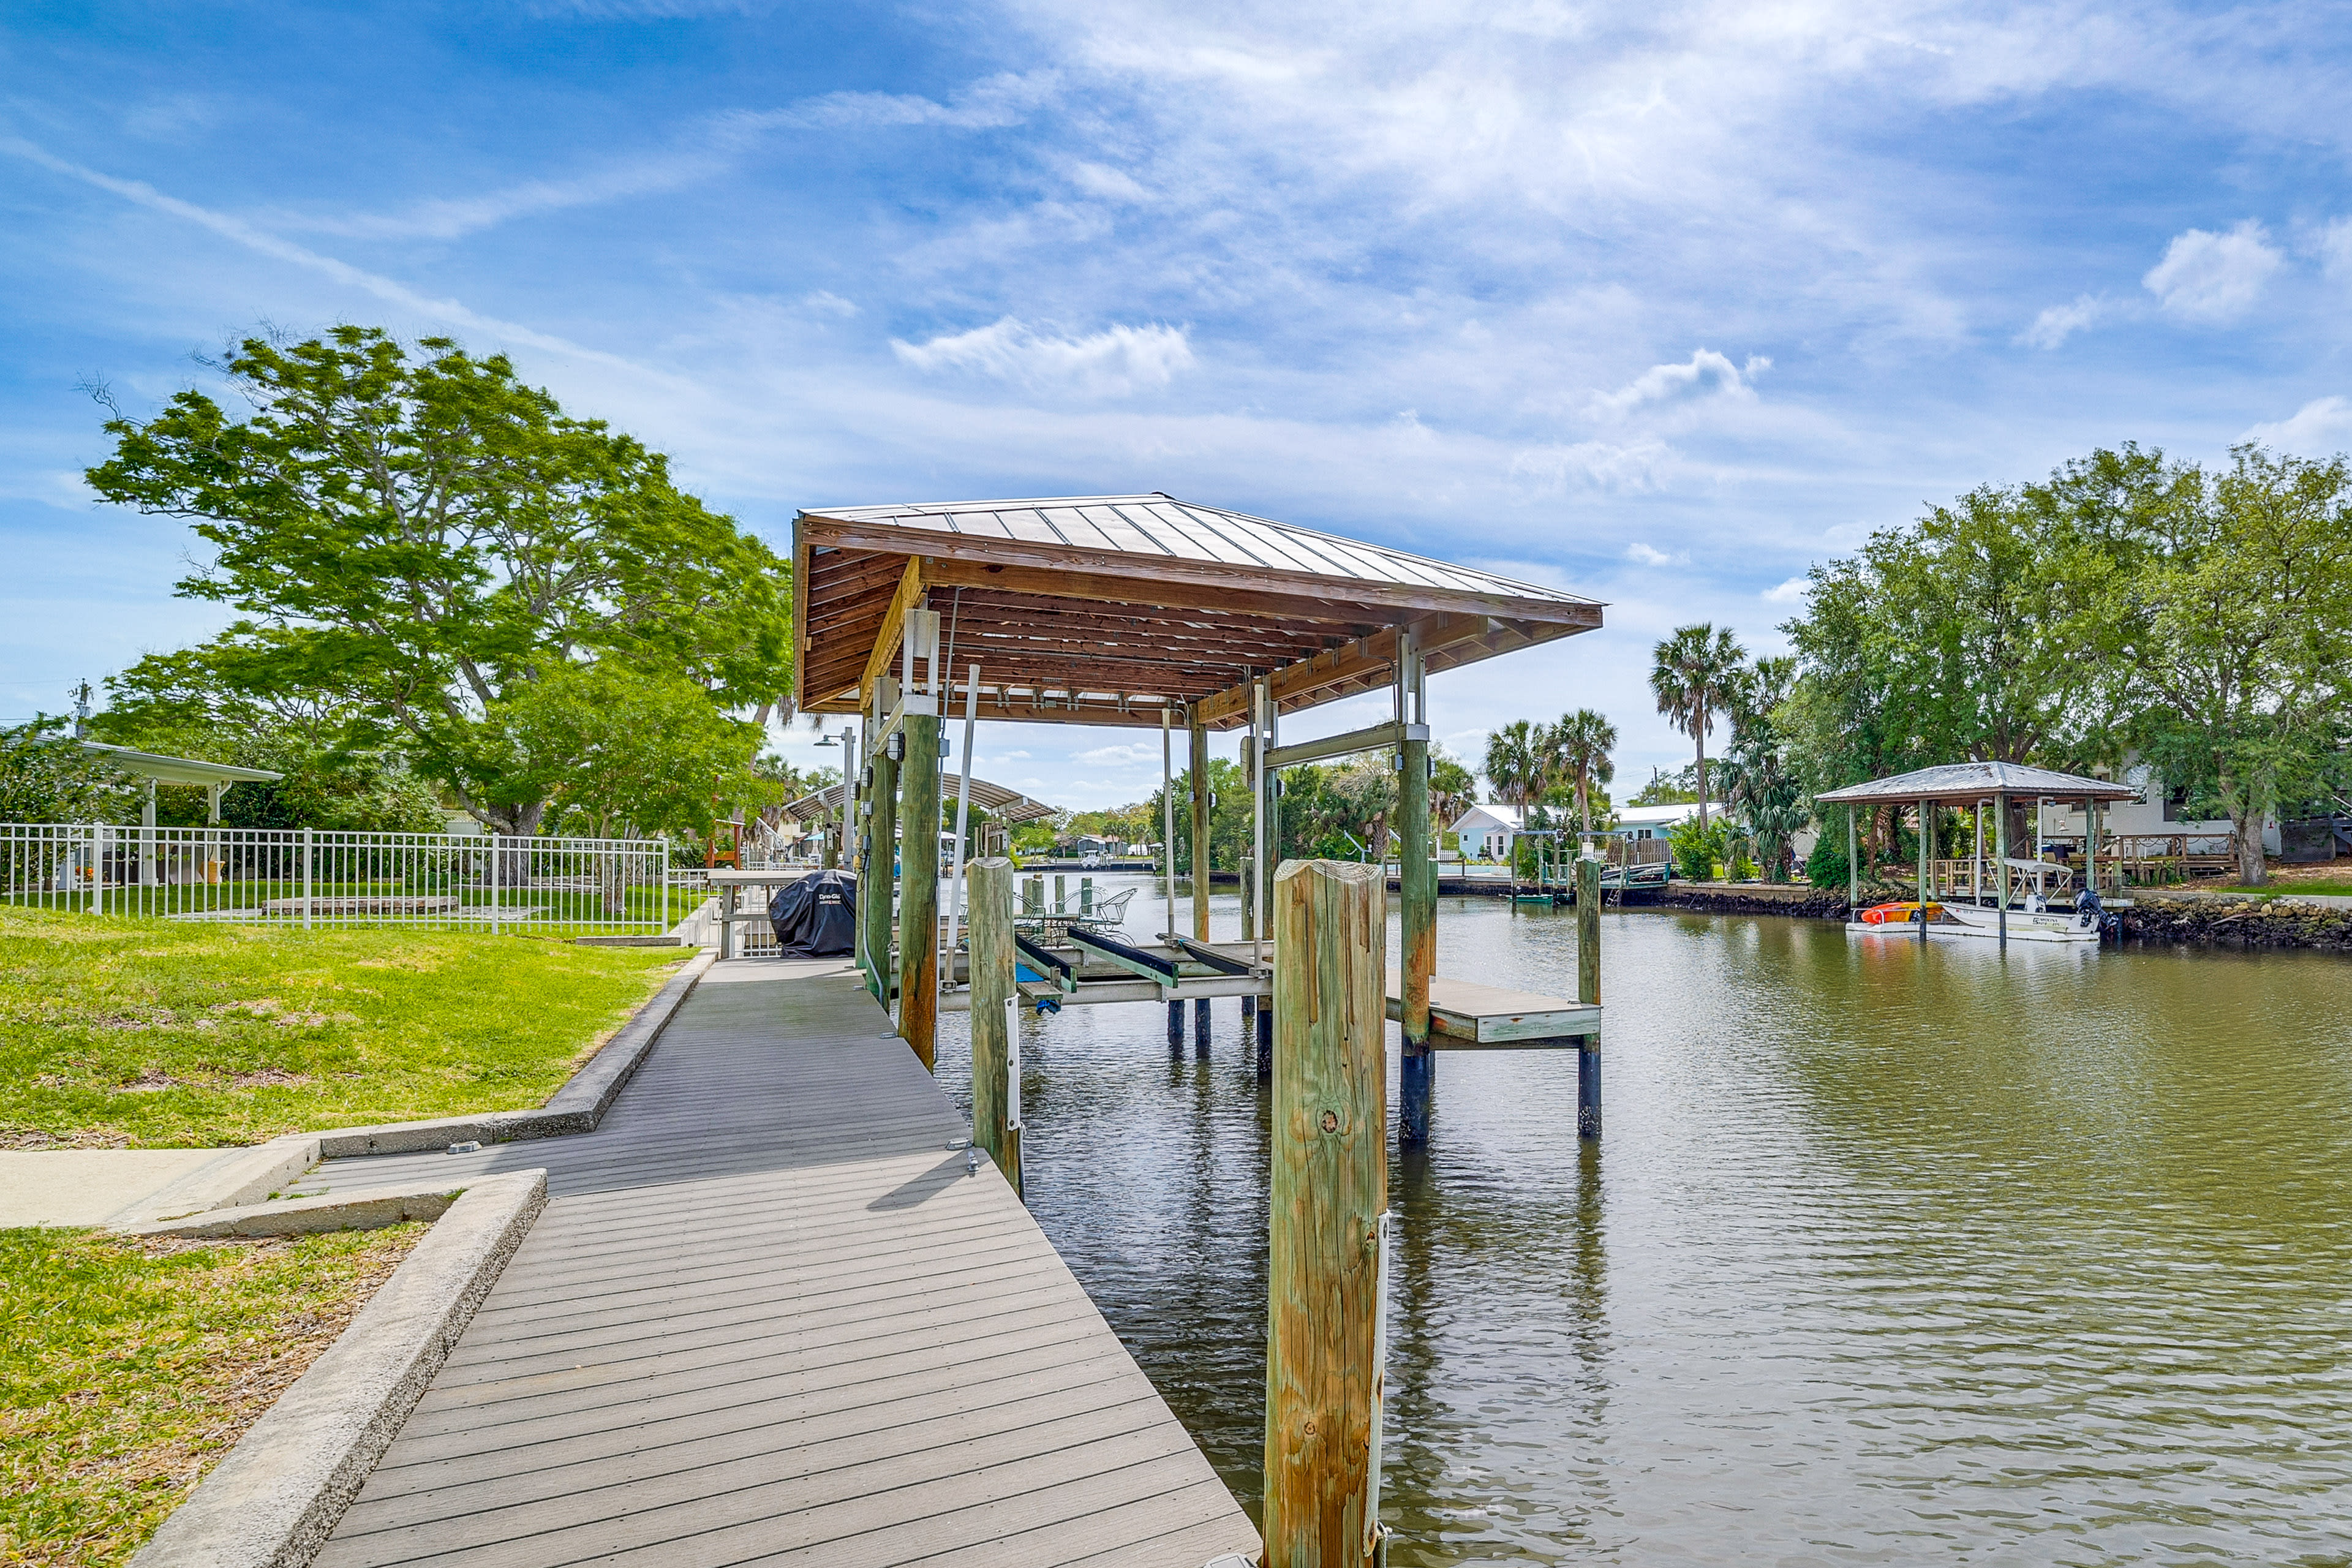 Boat Dock & Lift | Dining Area | Fish-Cleaning Station